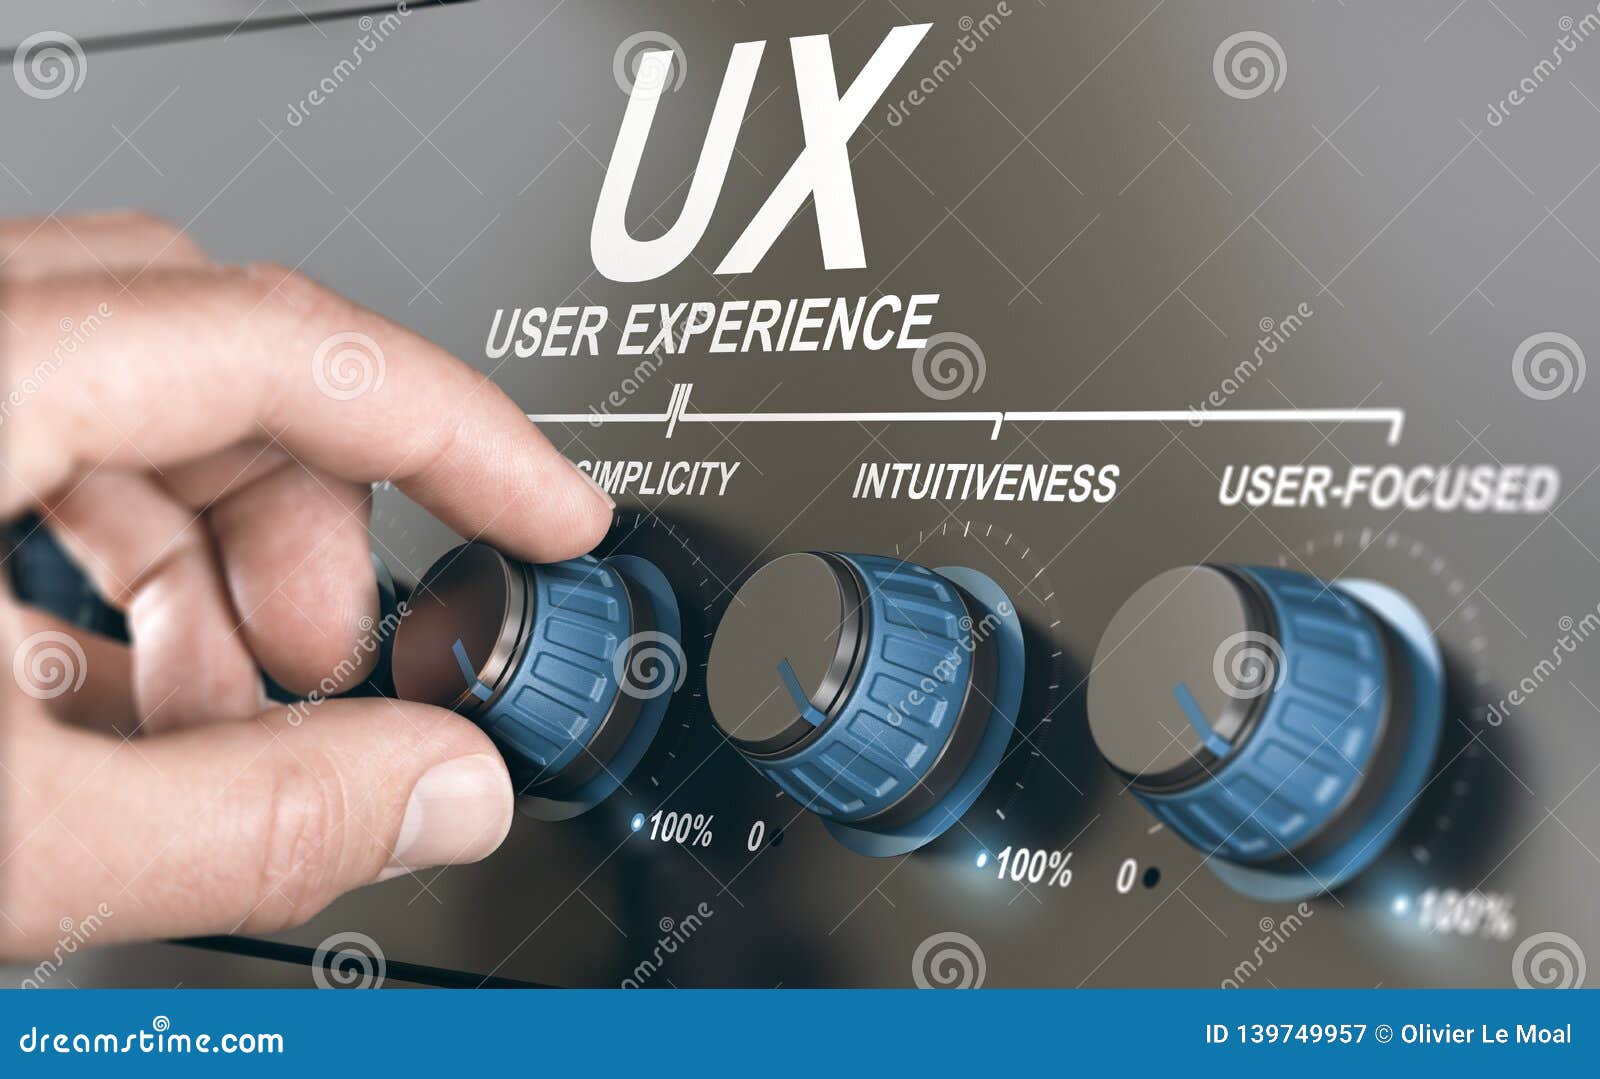 ux, user experience, web or app  concept